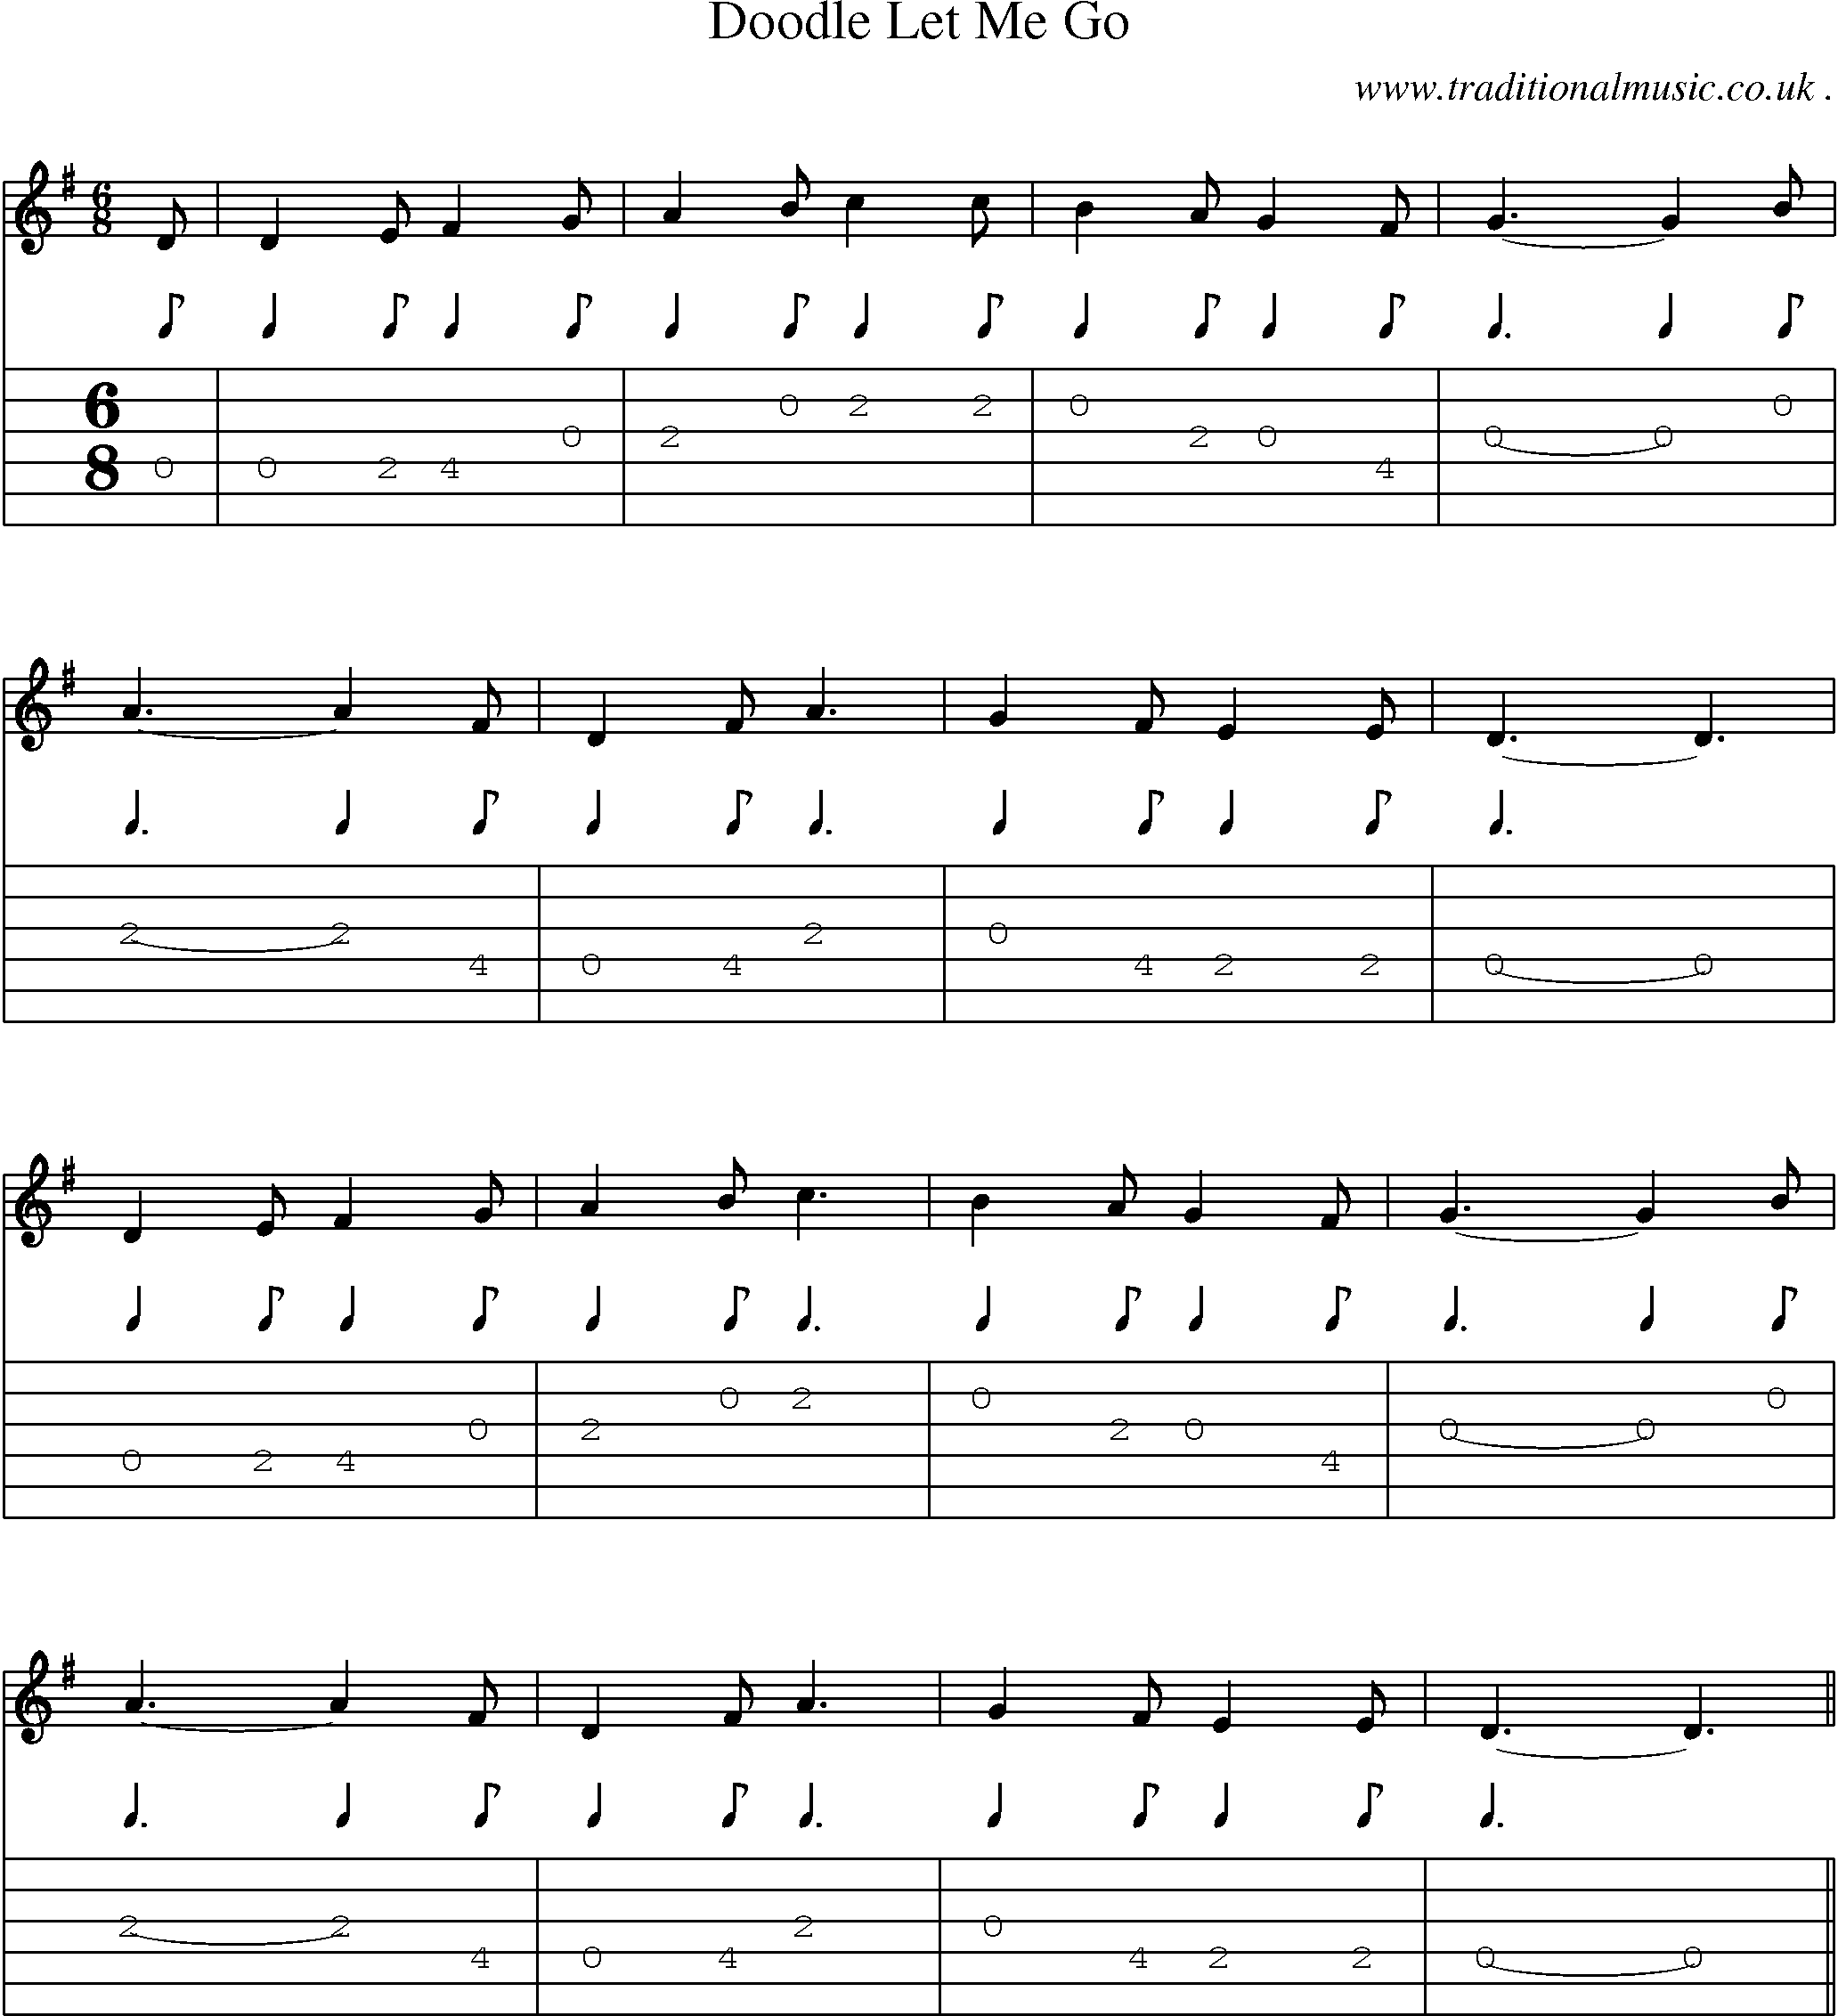 Sheet-Music and Guitar Tabs for Doodle Let Me Go